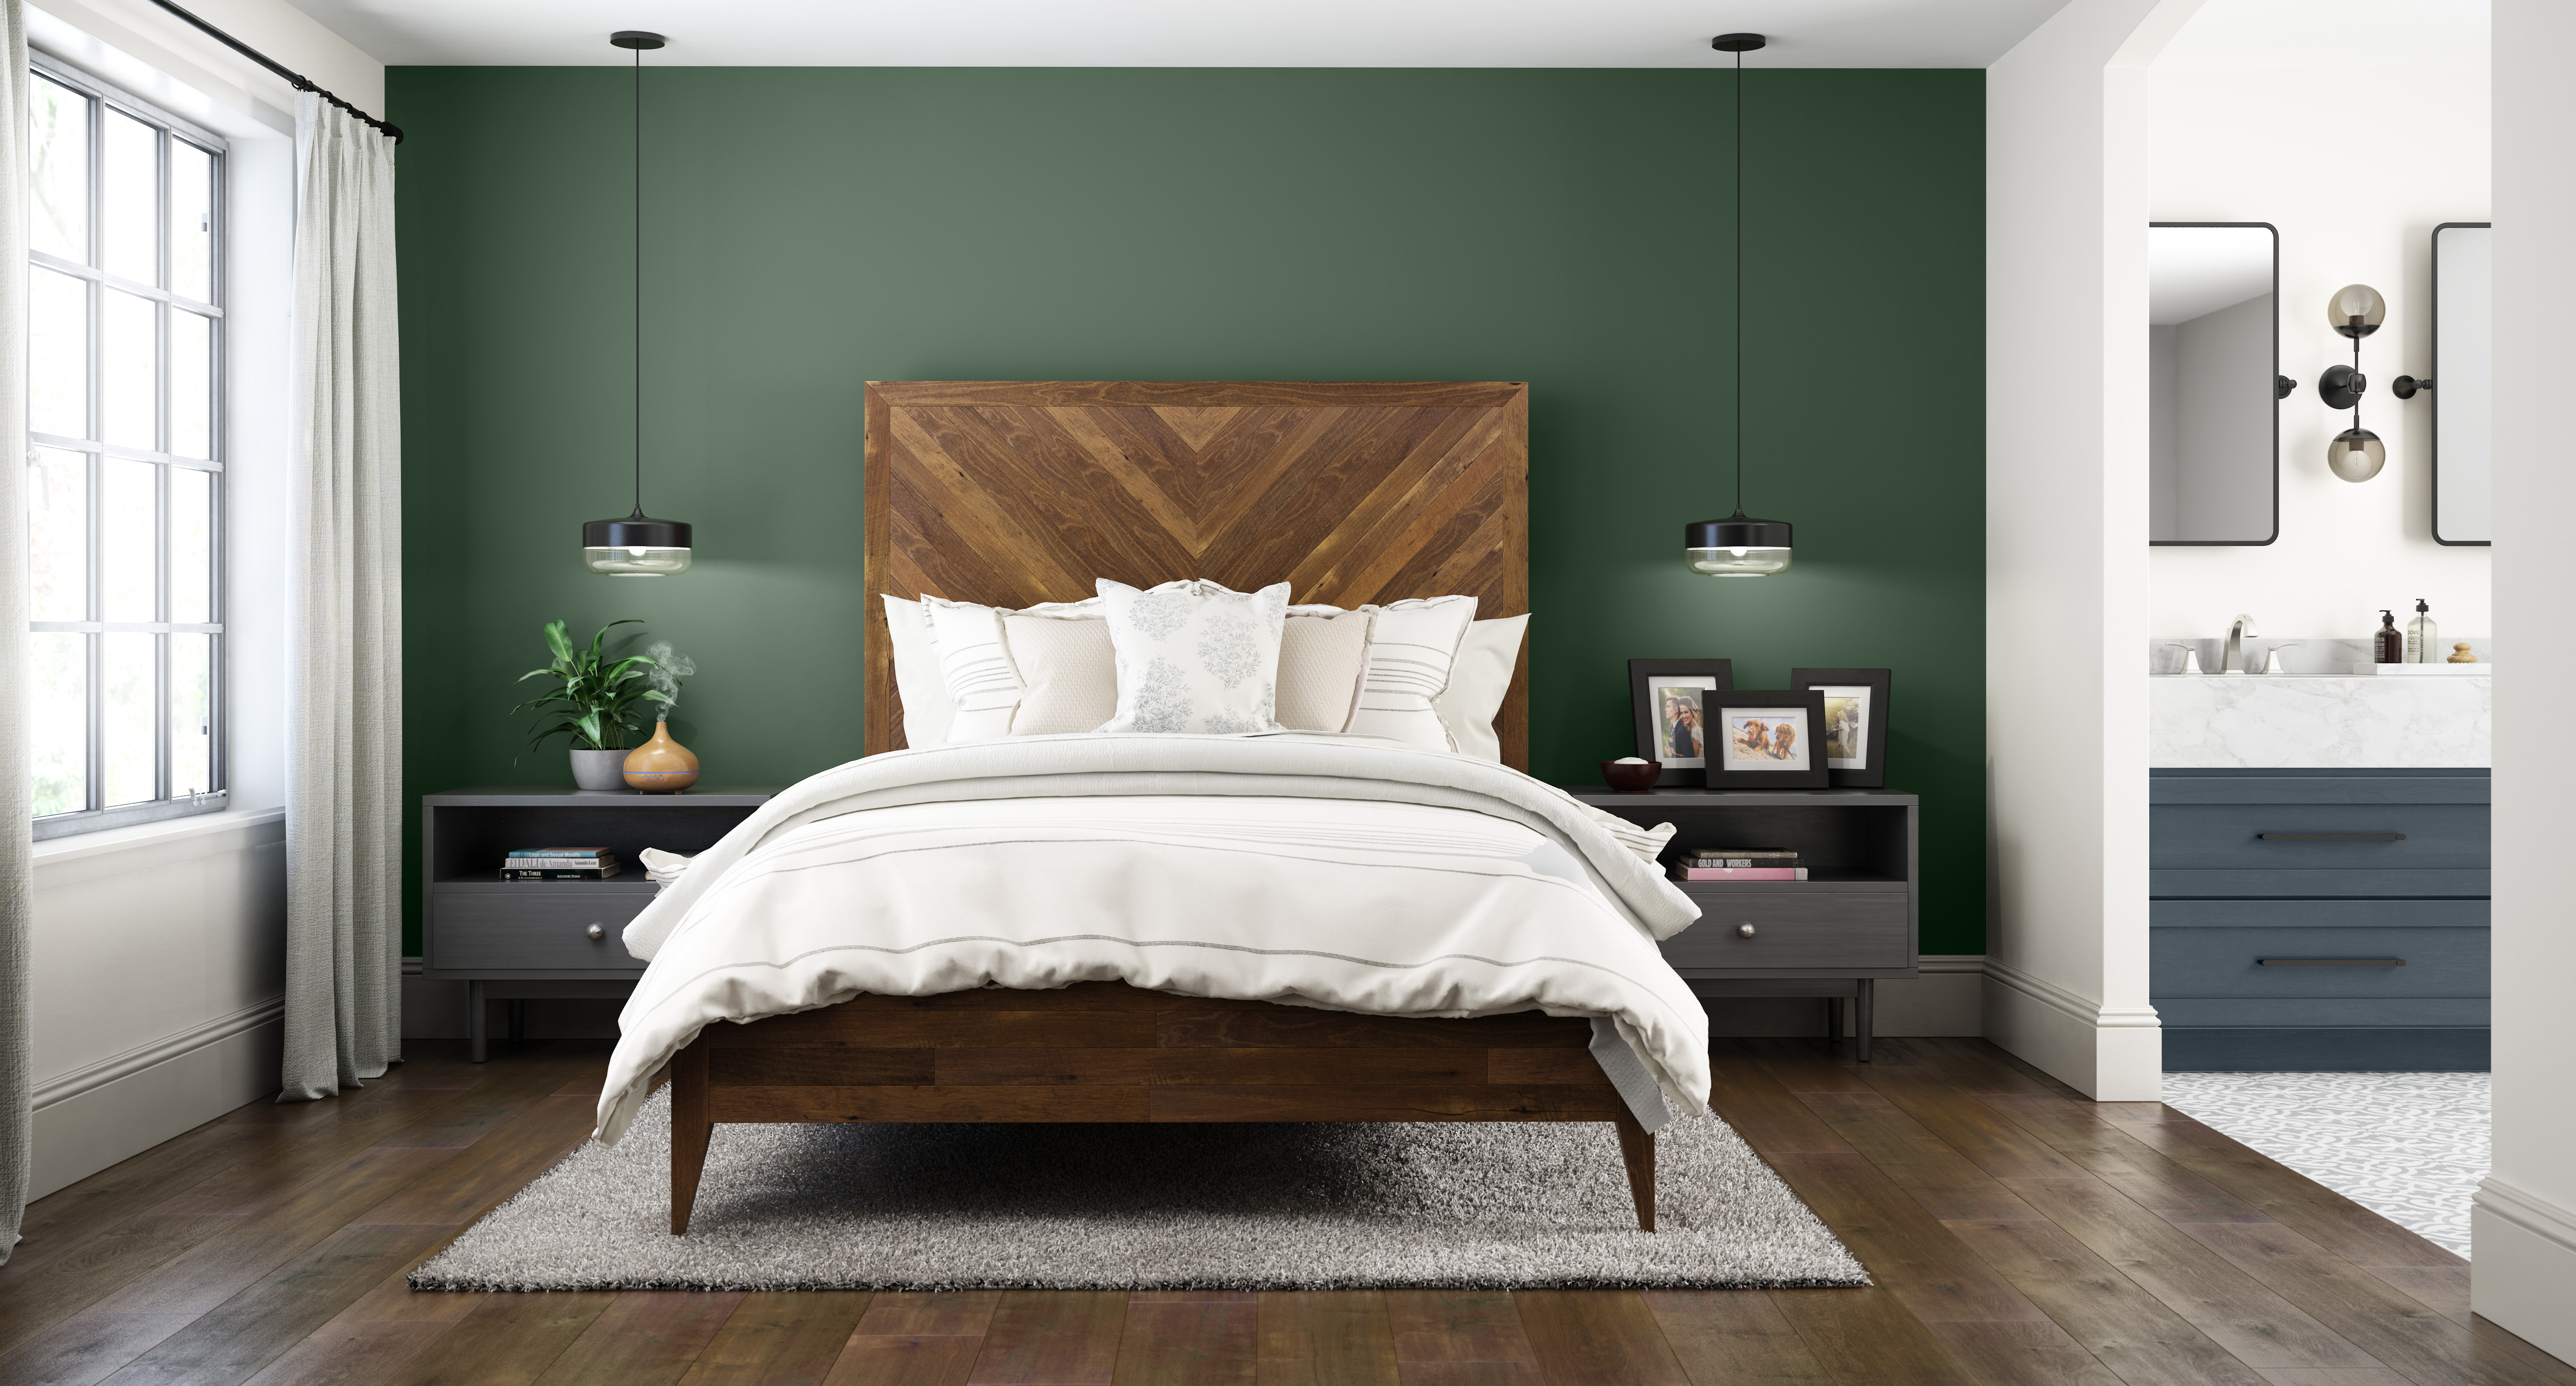 A white bedroom with an accent wall painted in a deep green colour.